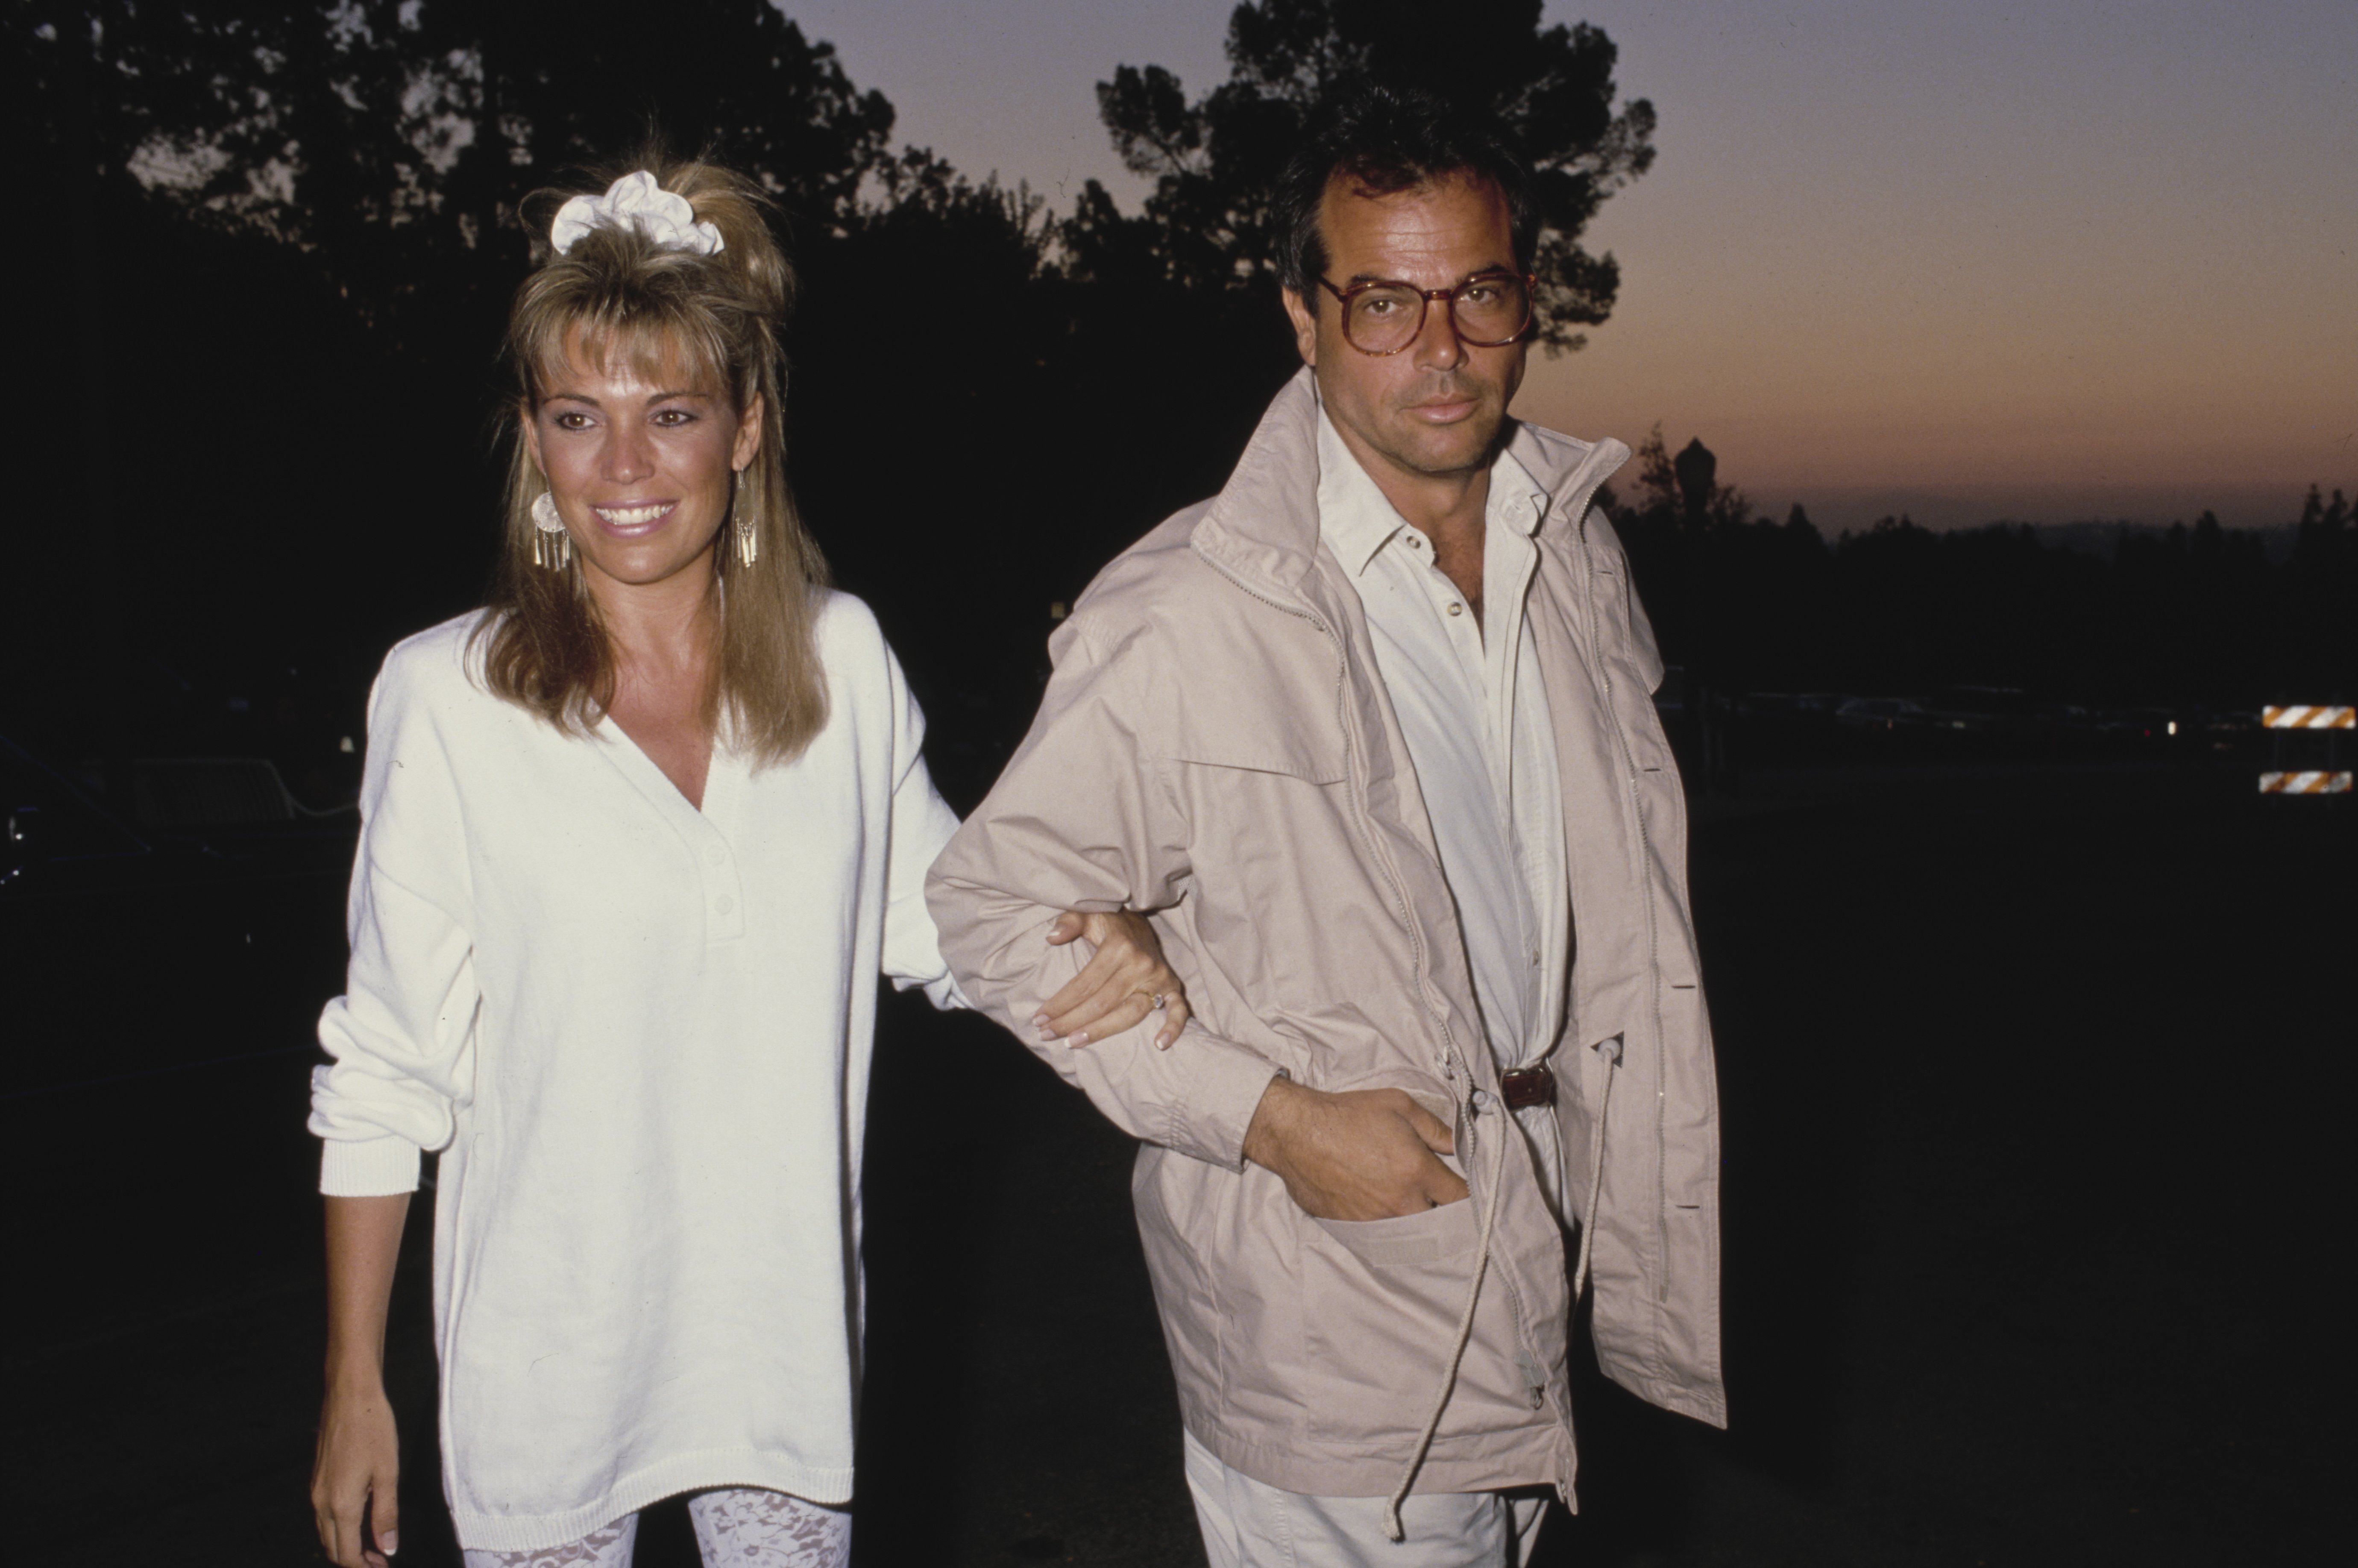 American television personality Vanna White and her husband, George Santo Pietro attend the Ringo Starr and His All-Starr Band concert at the Greek Theatre in Los Angeles, California, on September 4, 1989. | Source: Getty Images